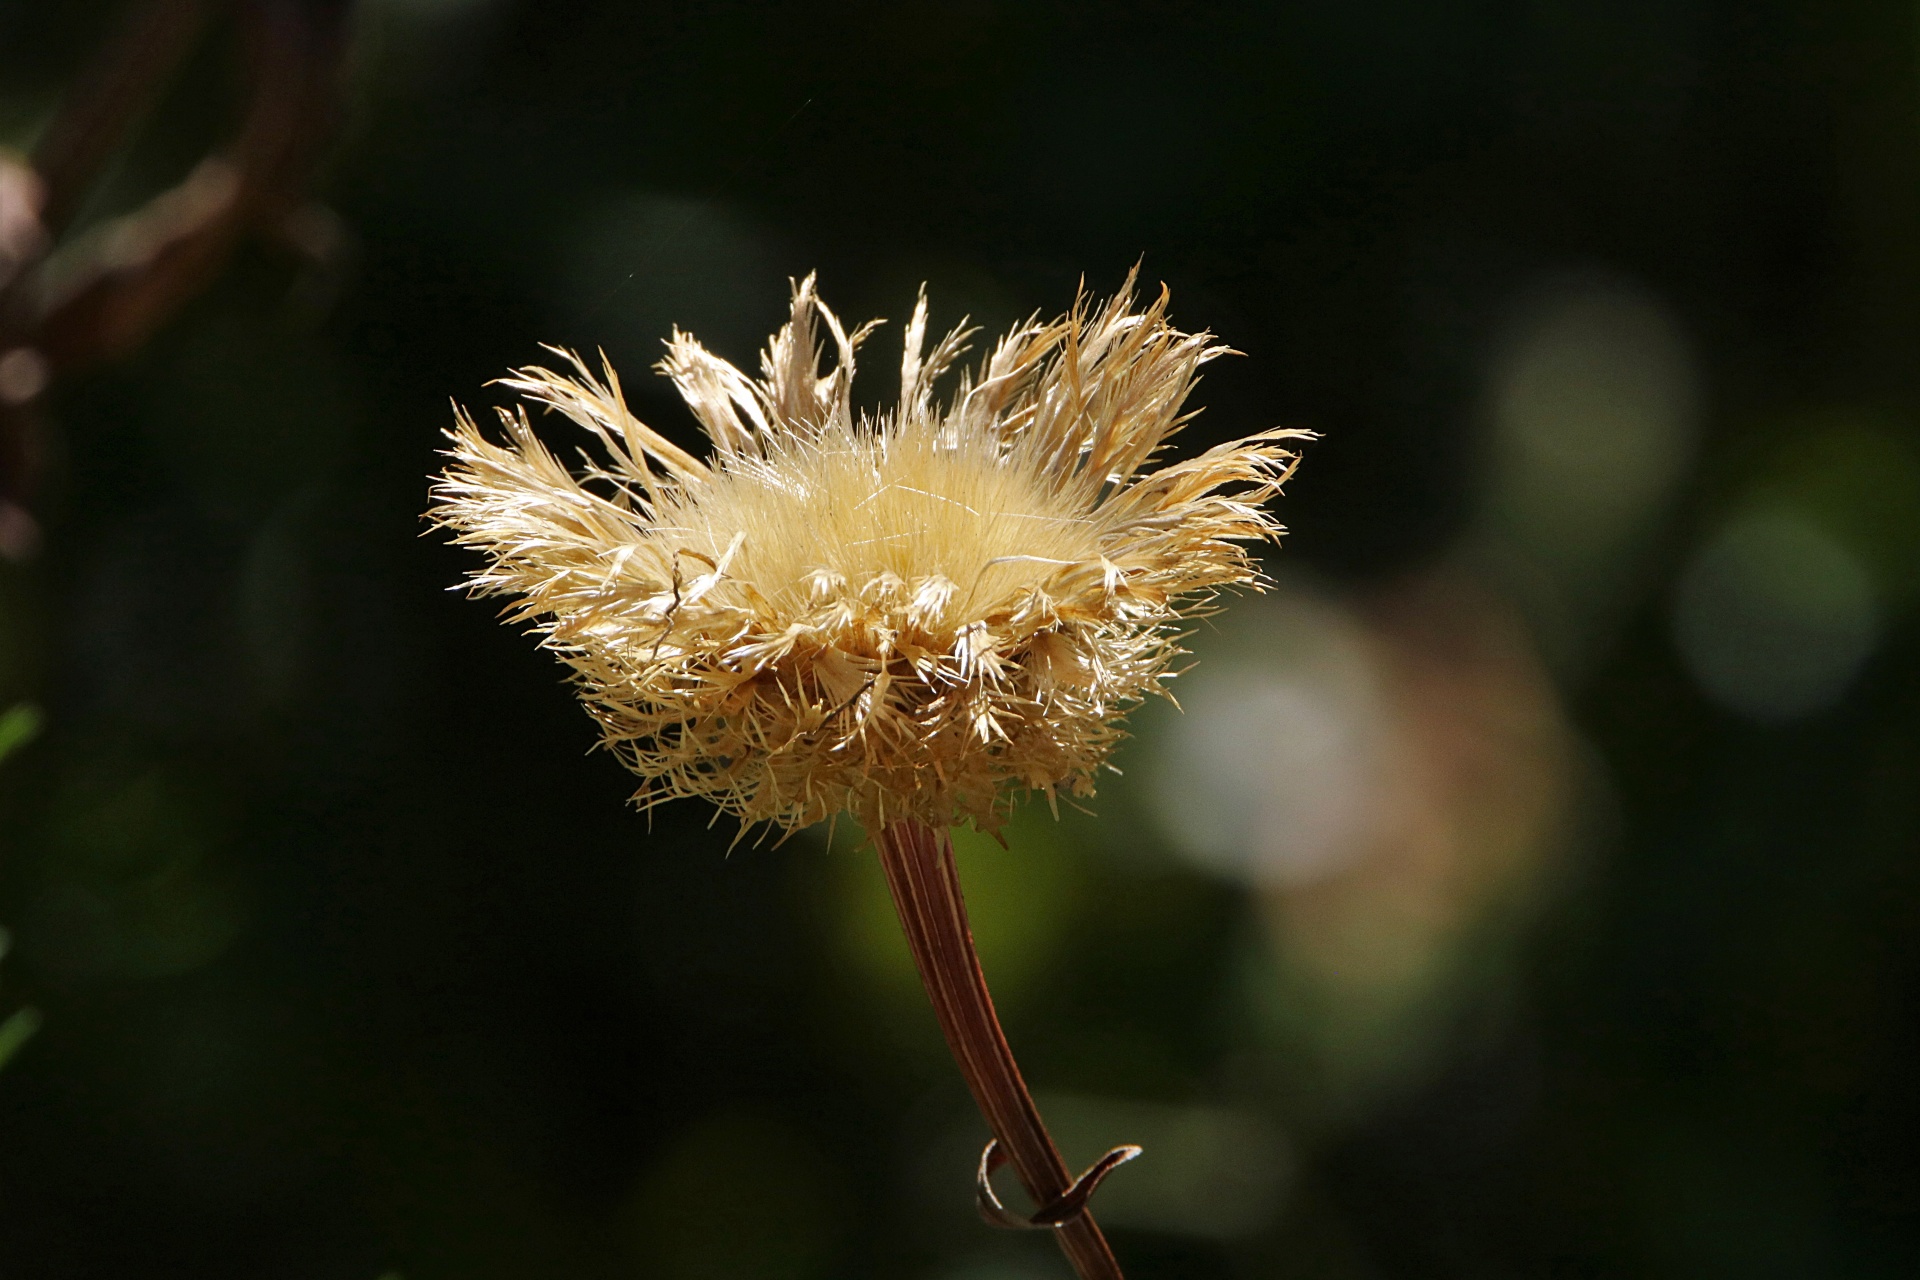 Close-up of a dried, gold colored American basket flower on a dark background with bokeh.